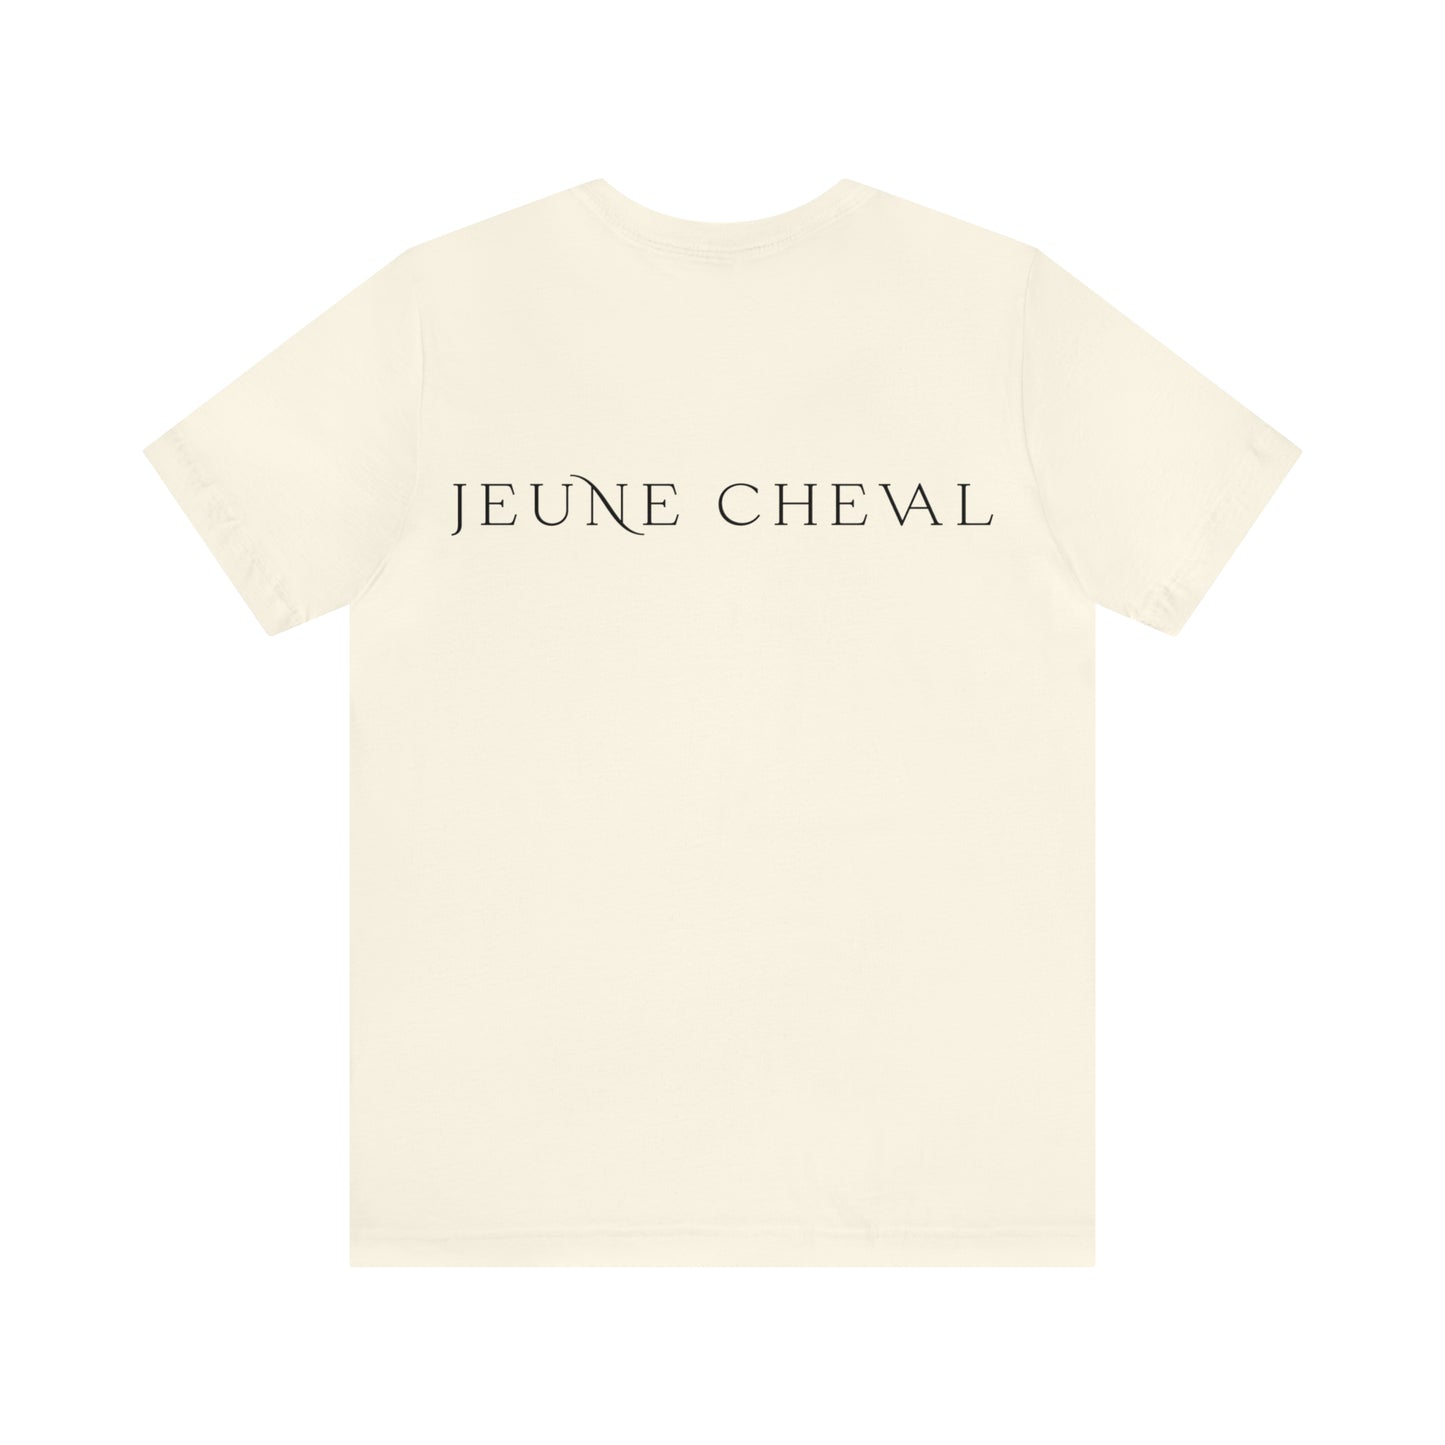 Adult Juene Cheval Tee